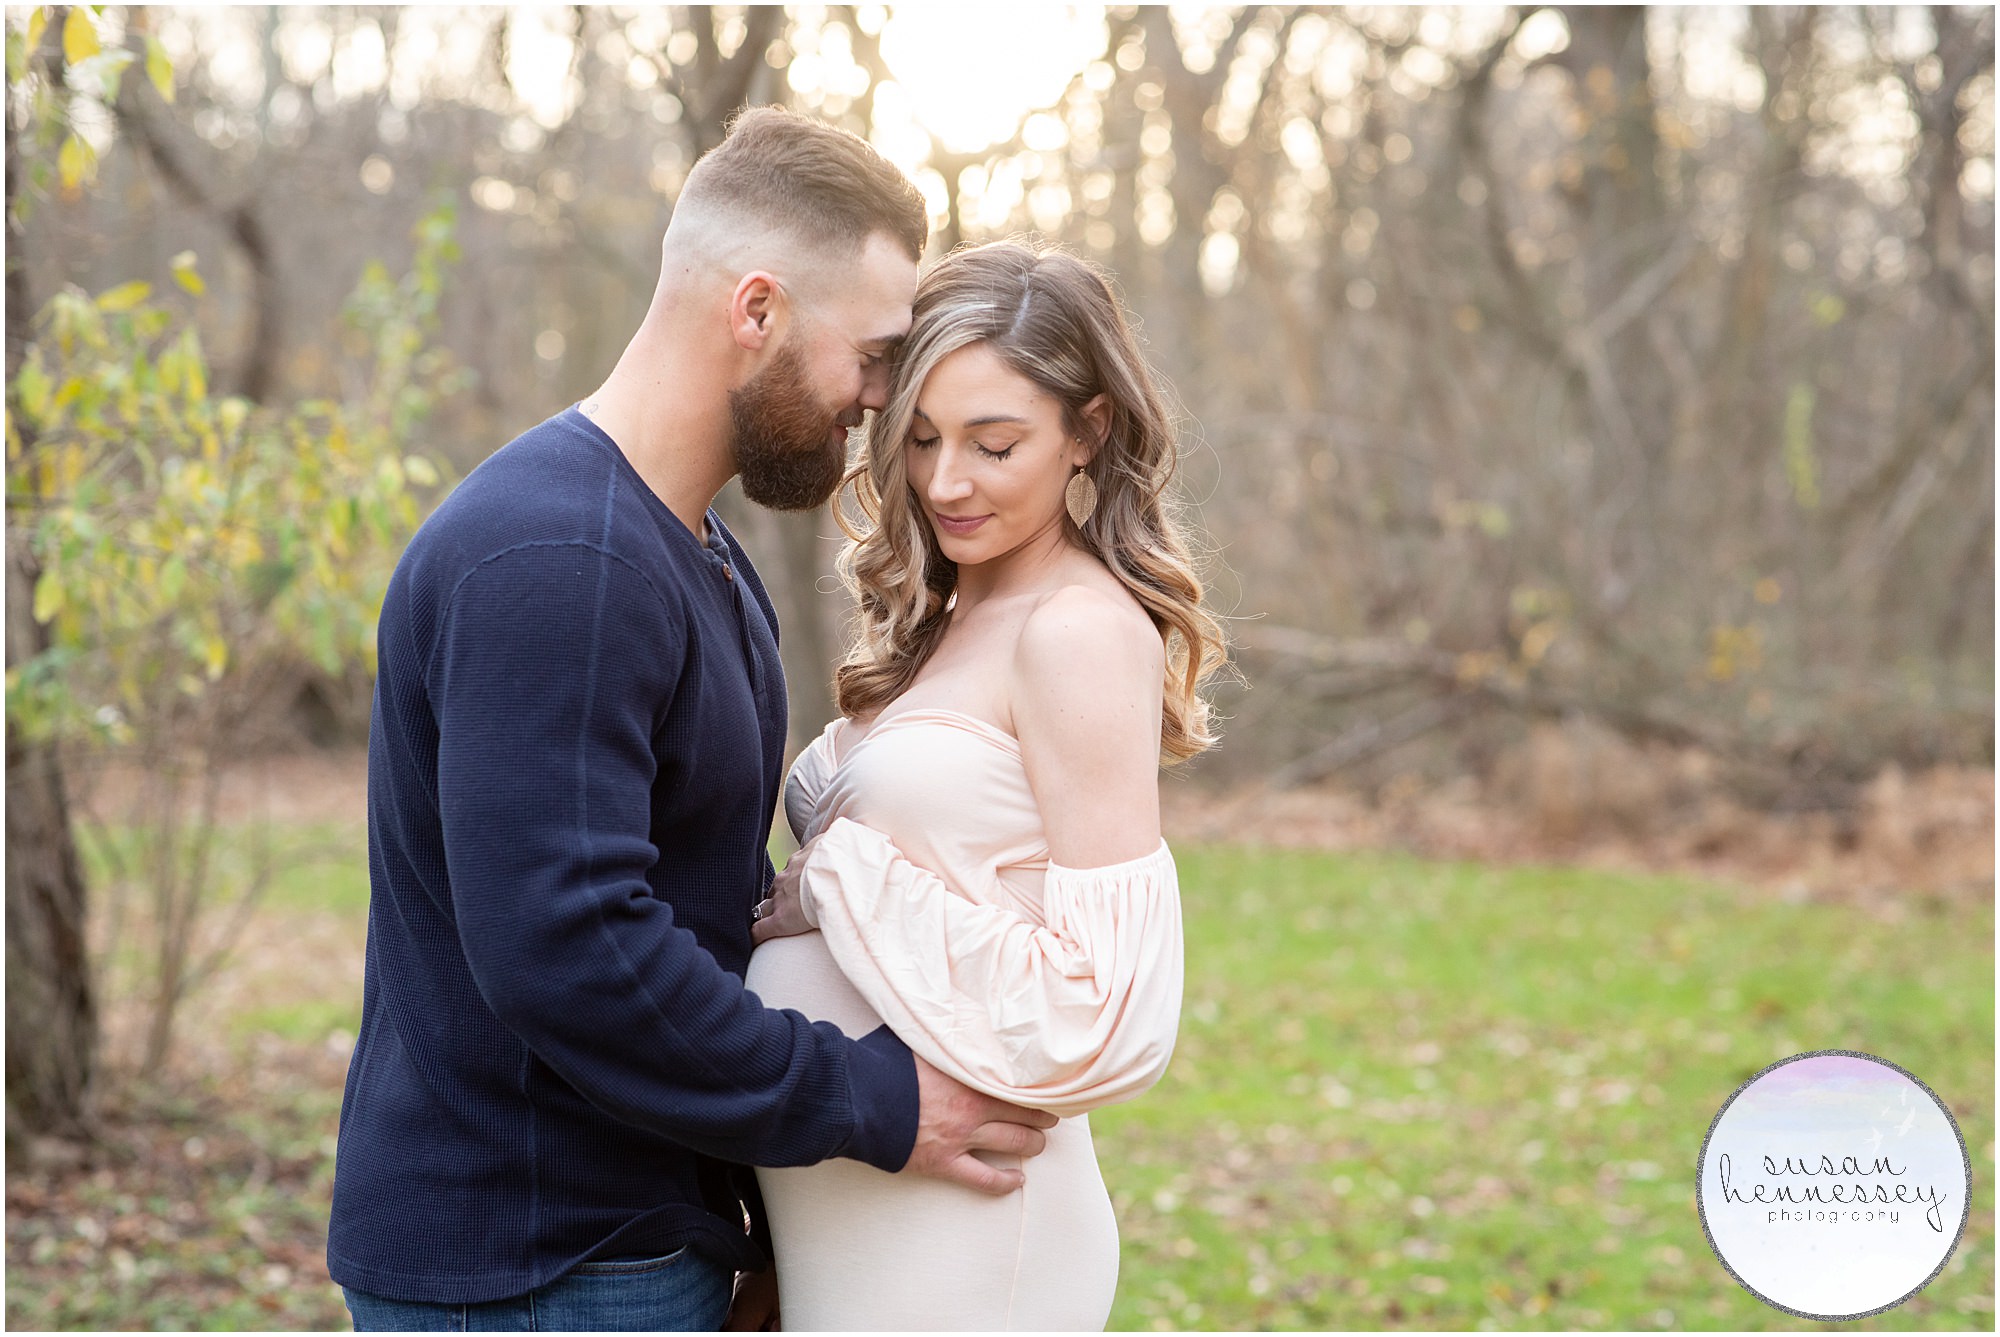 Susan Hennessey Photography, a South Jersey photographer offers a bump to baby collection that includes the maternity and newborn sessions. 